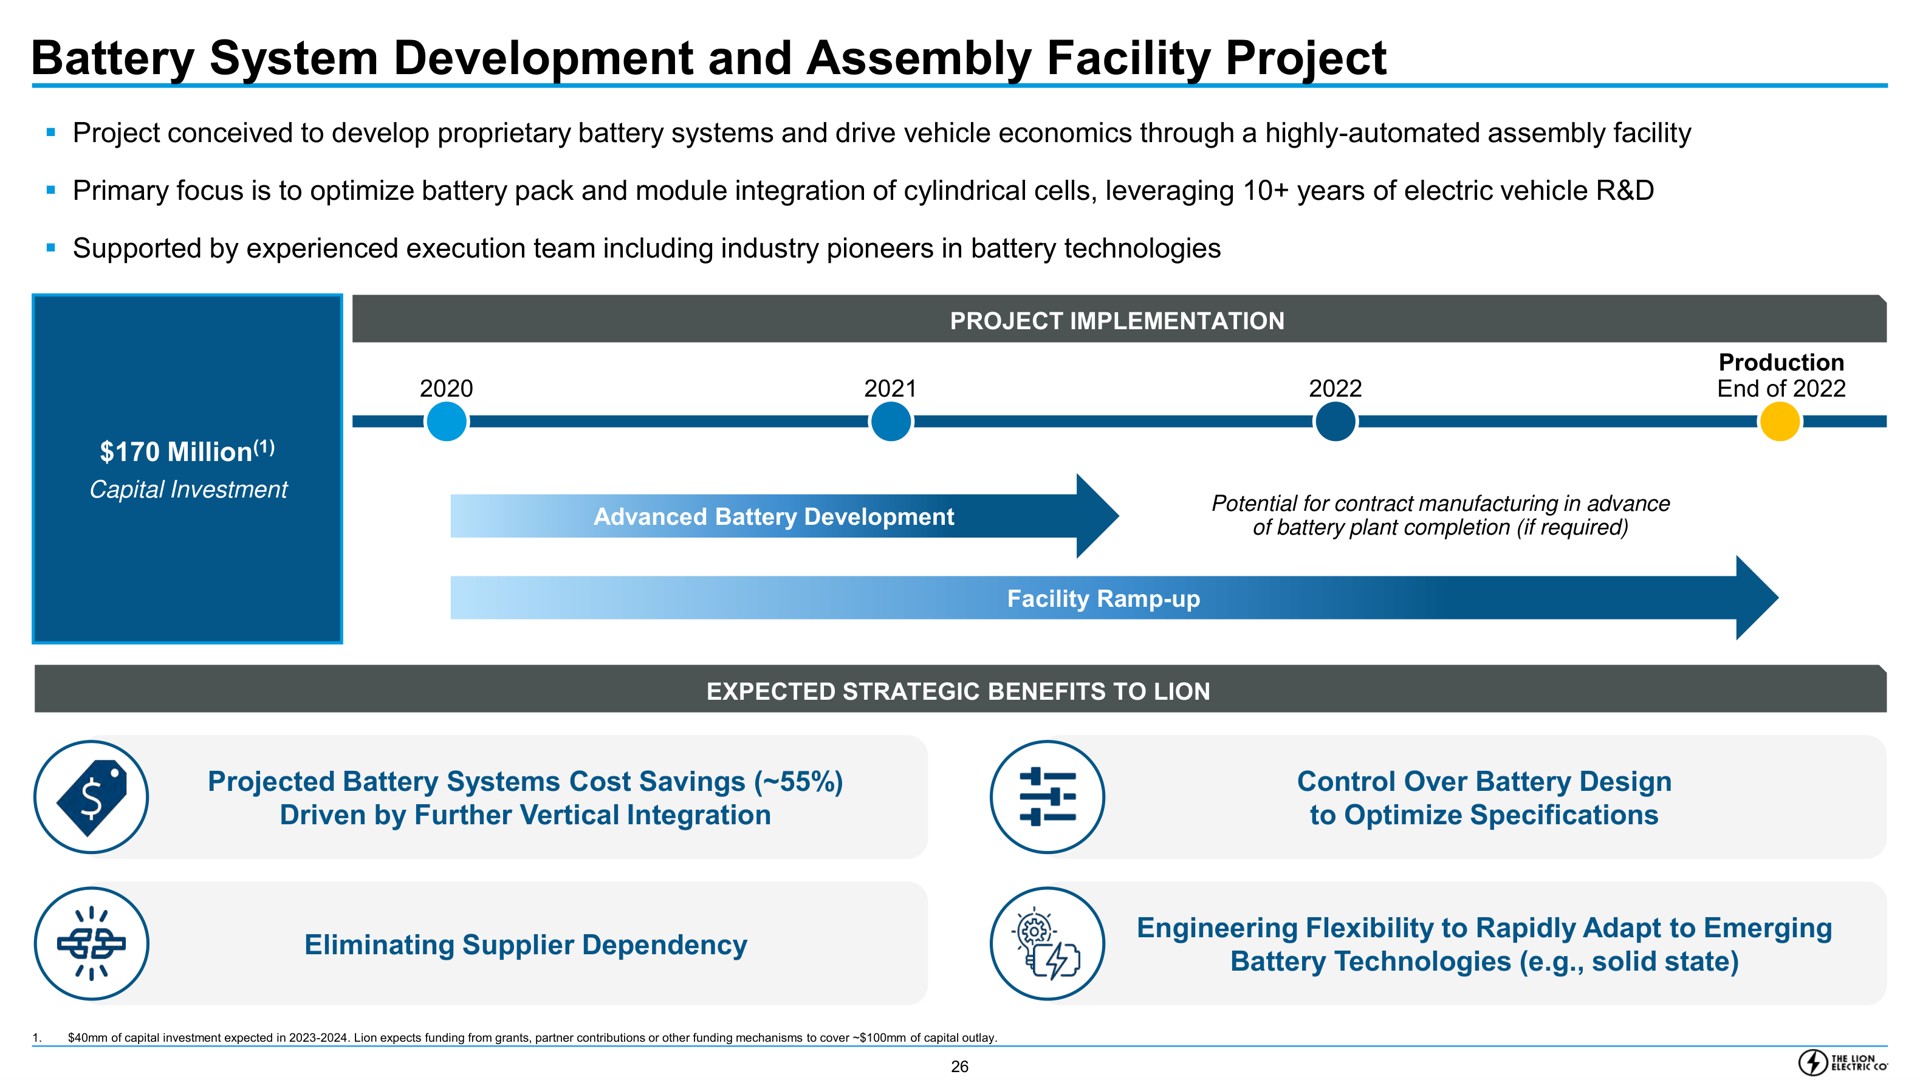 battery system development and assembly facility project | Lion Electric